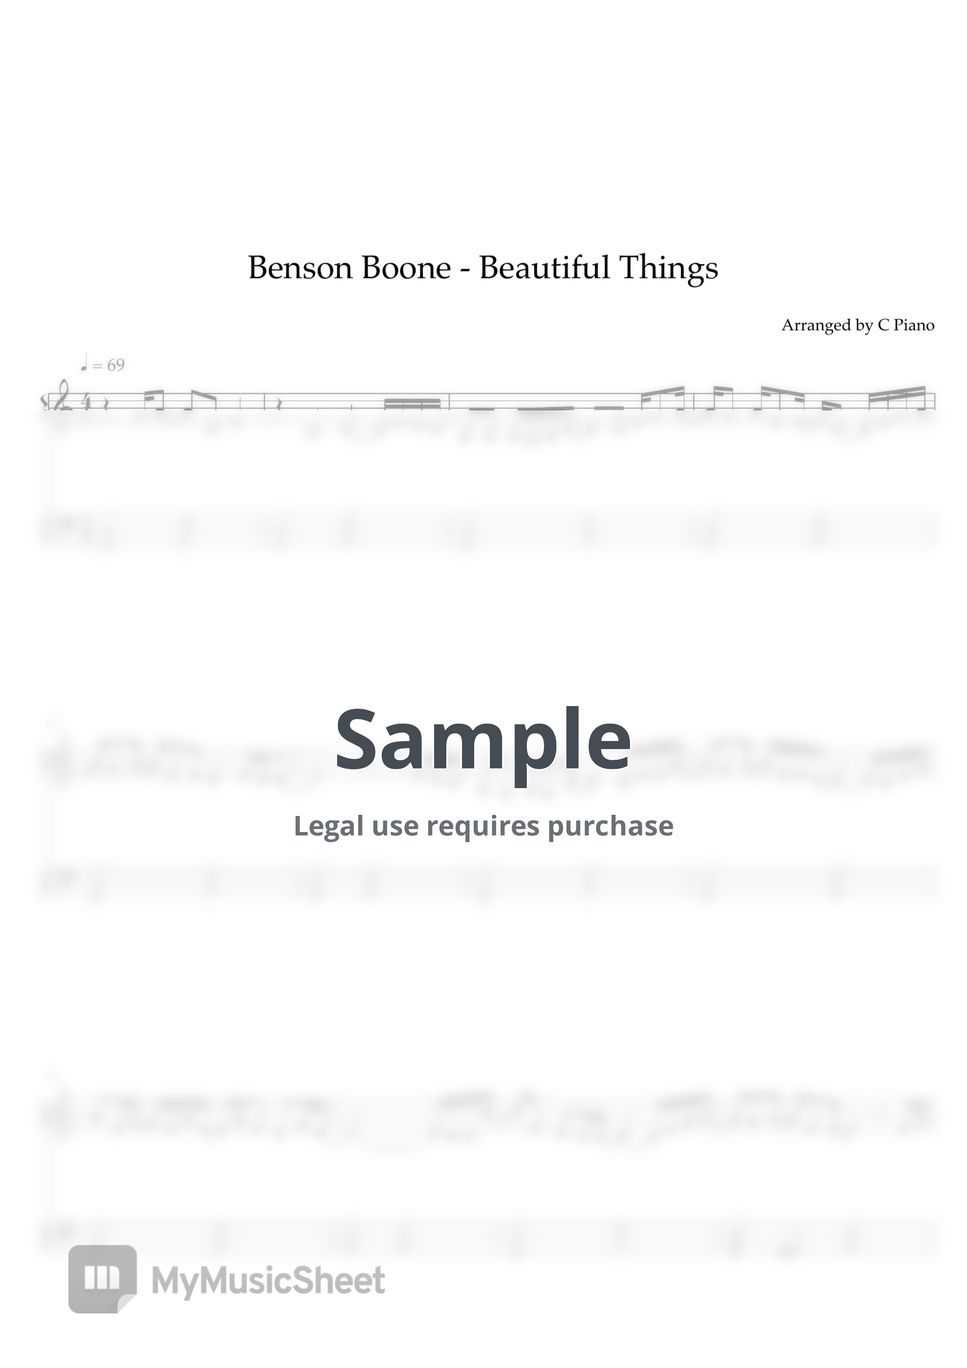 Benson Boone - Beautiful Things (Easy Version) by C Piano